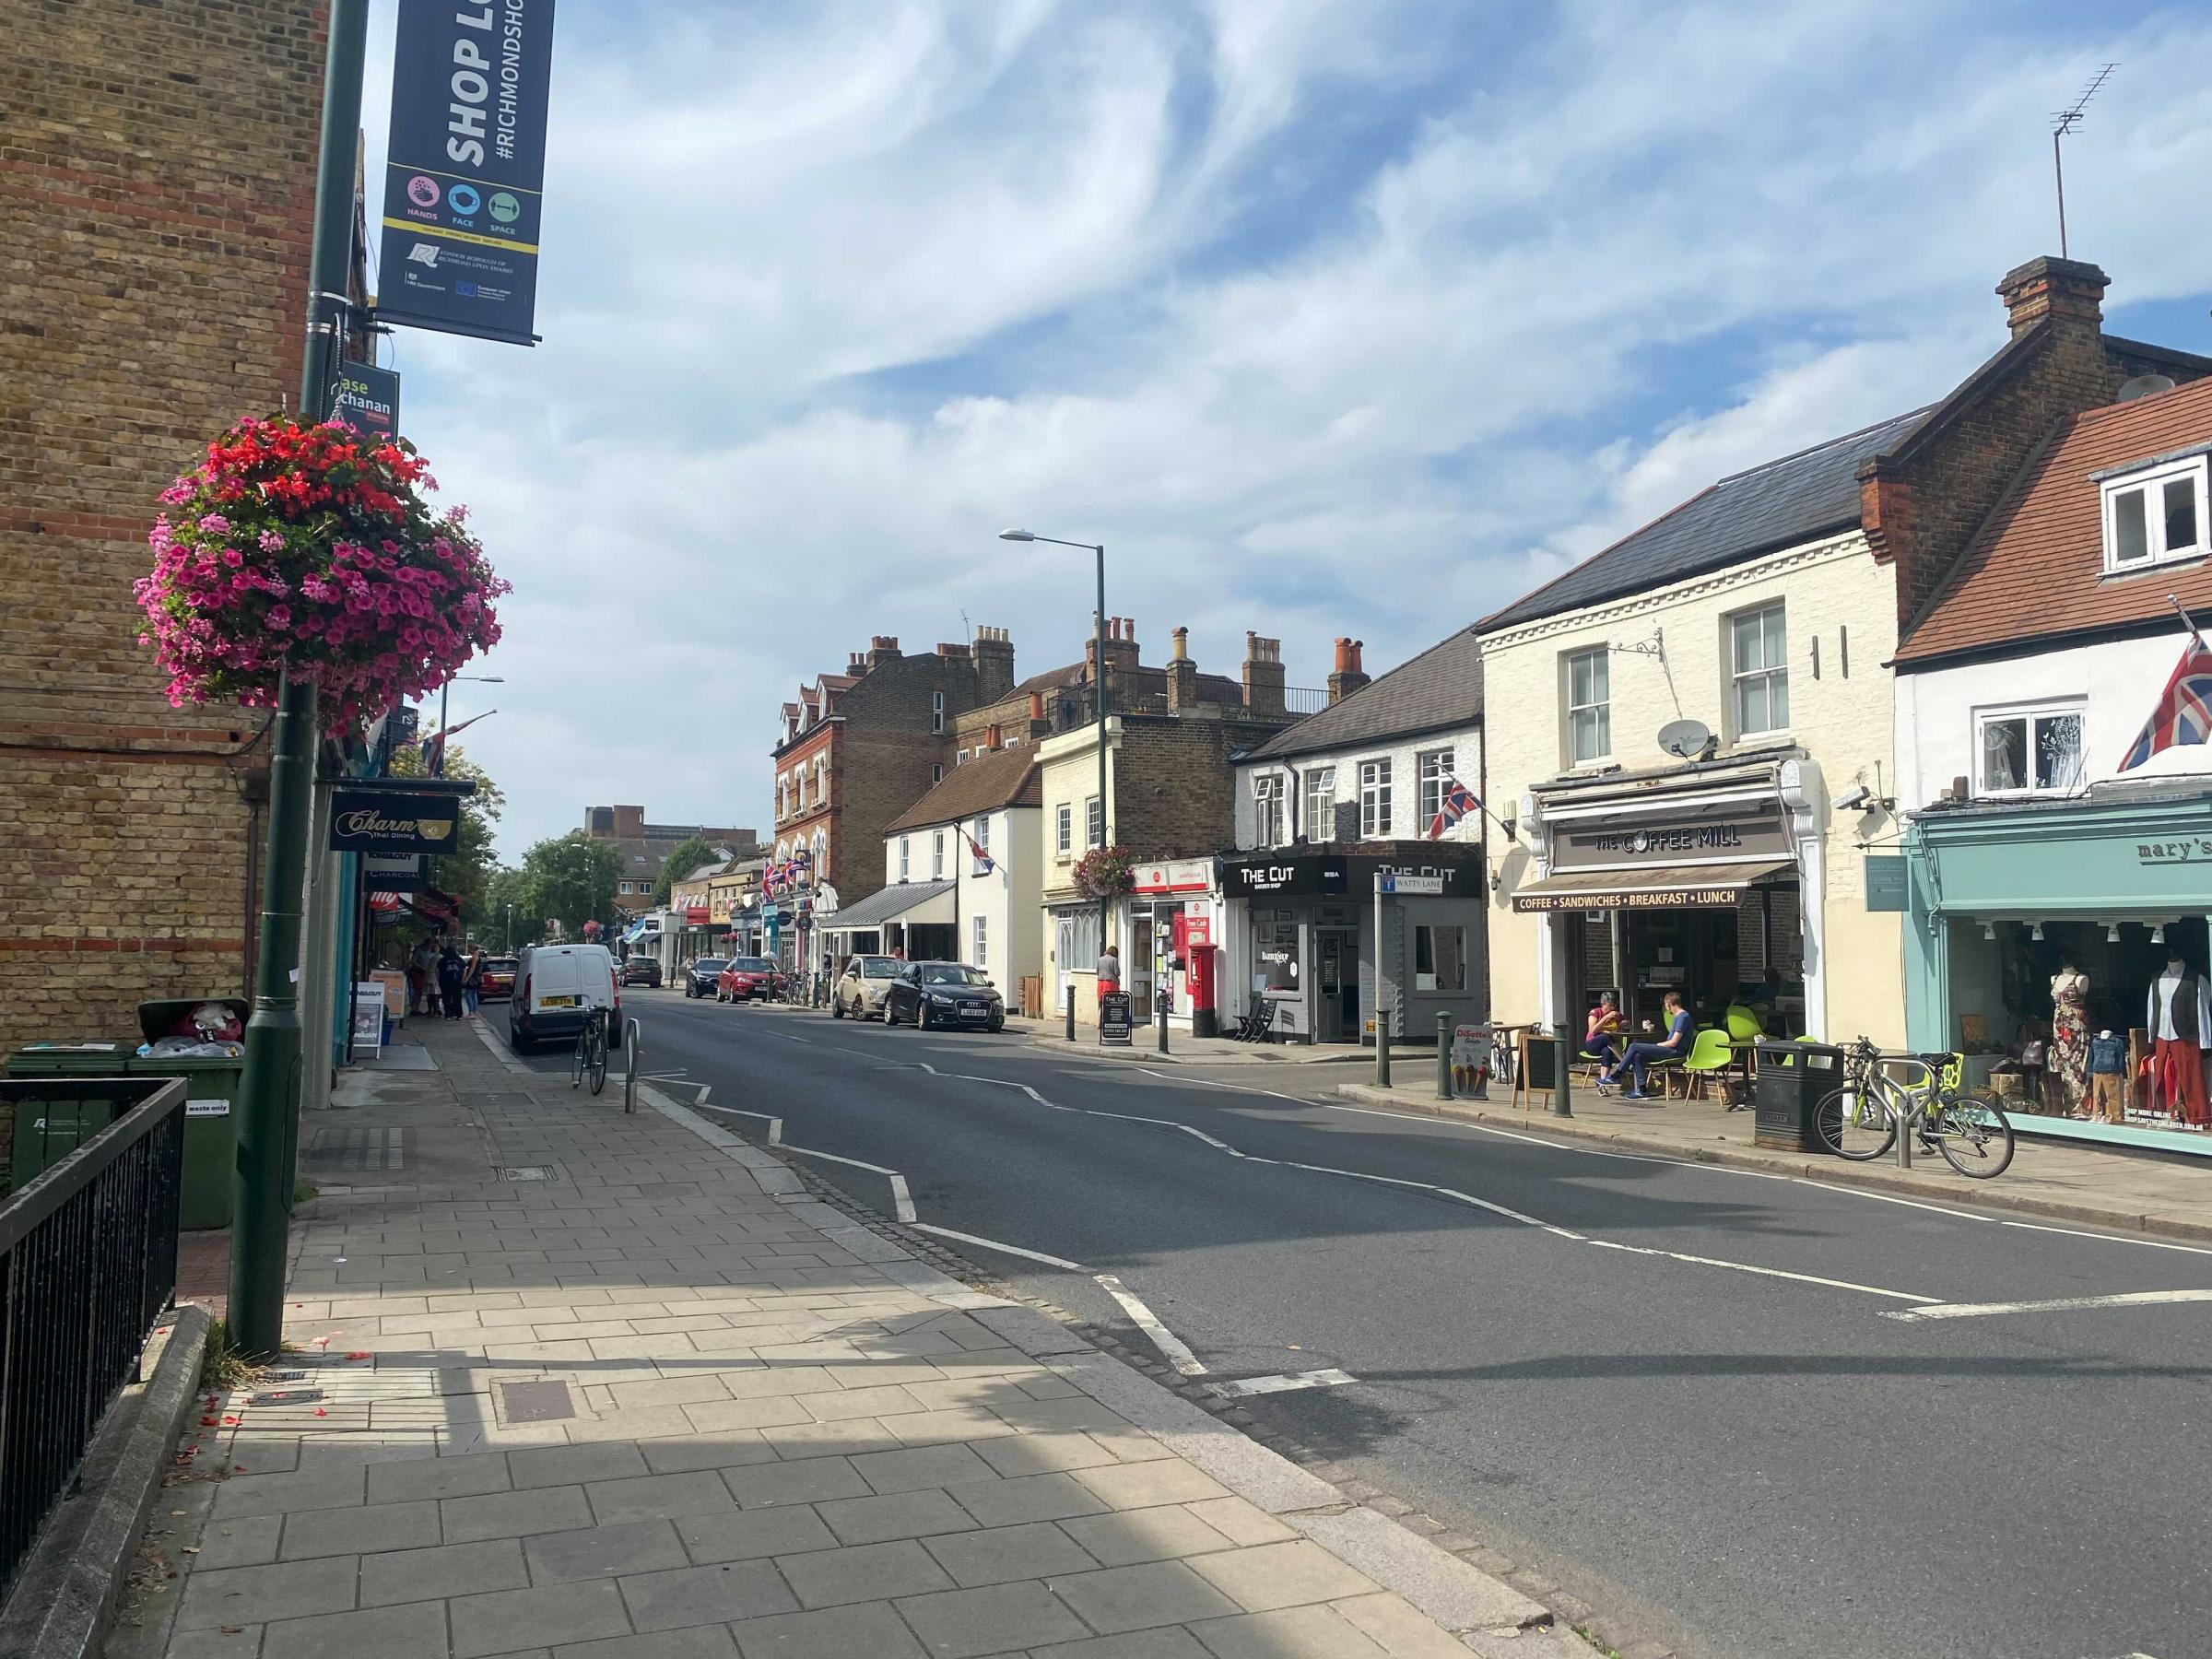 Teddington High Street Is Home To Many Independent Shops - permission to use by all partners by James Mayer